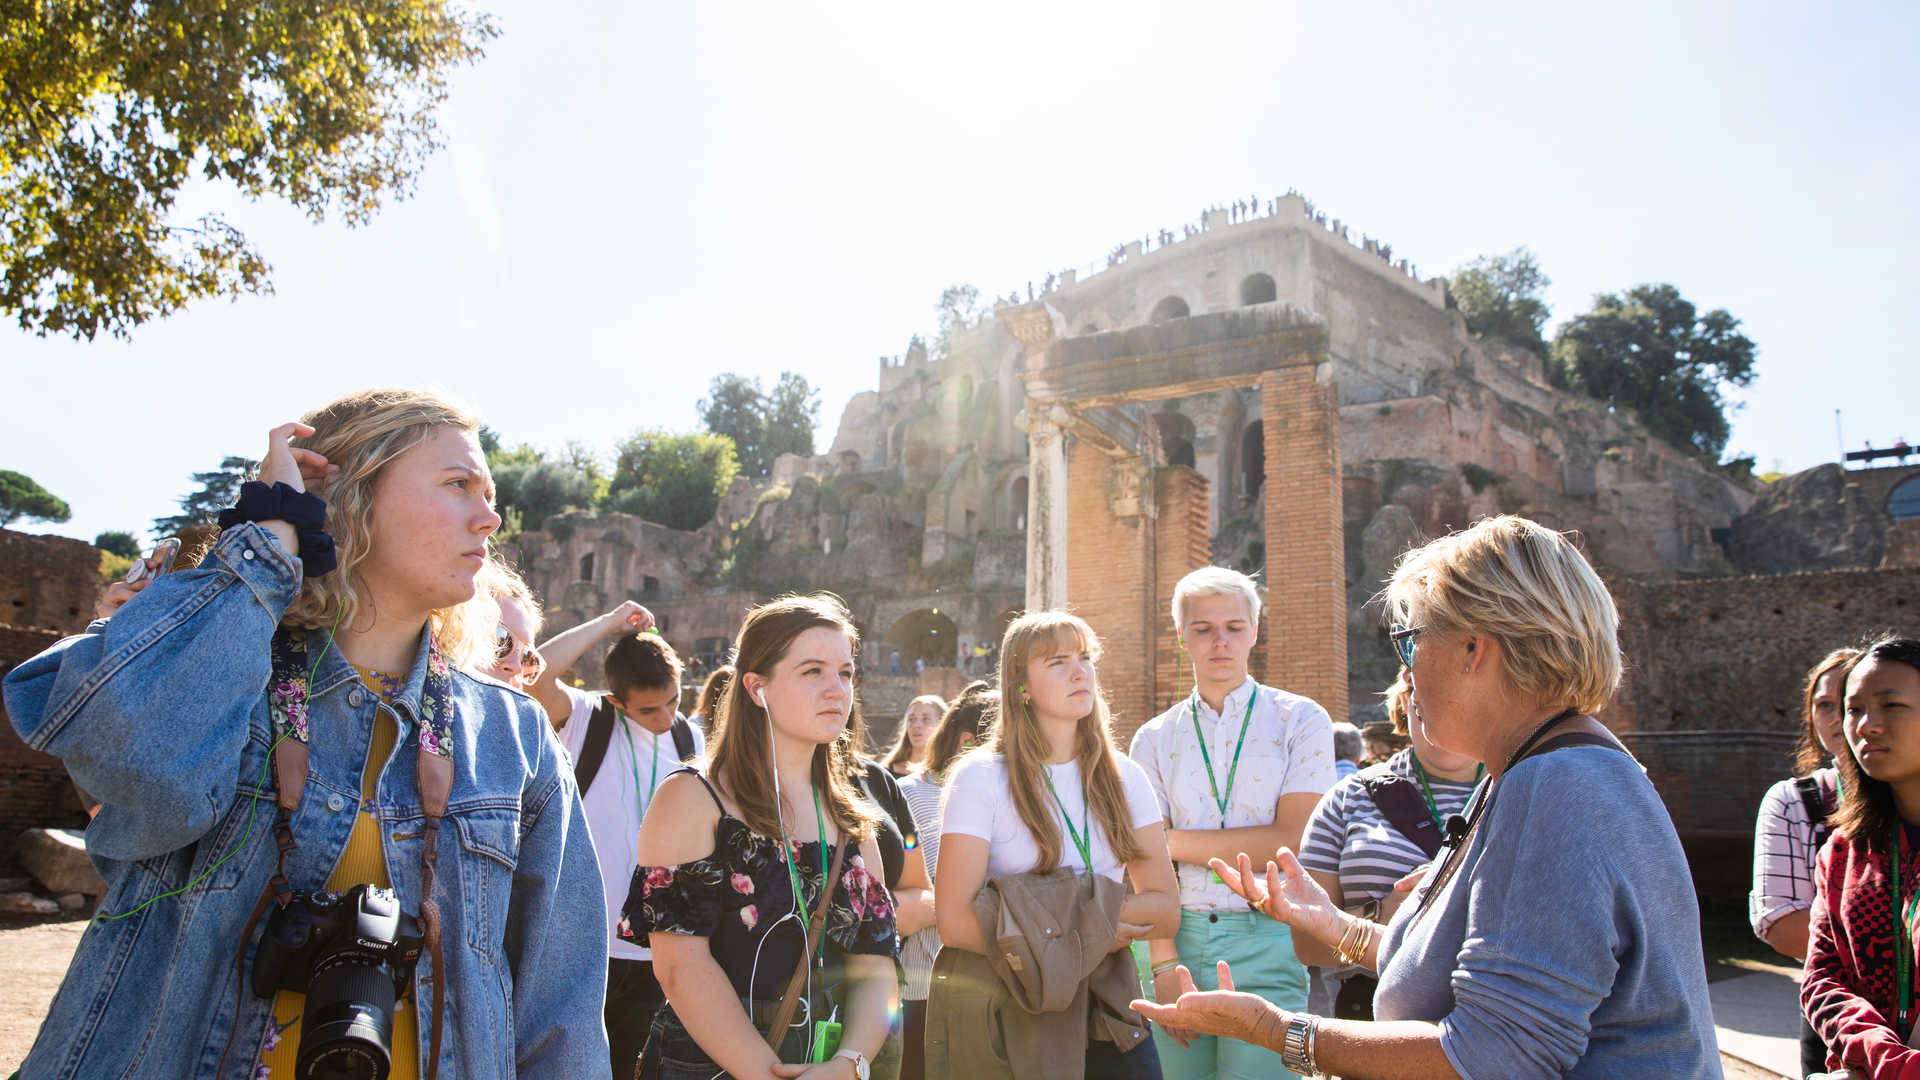 Students receive instruction at a site in Rome